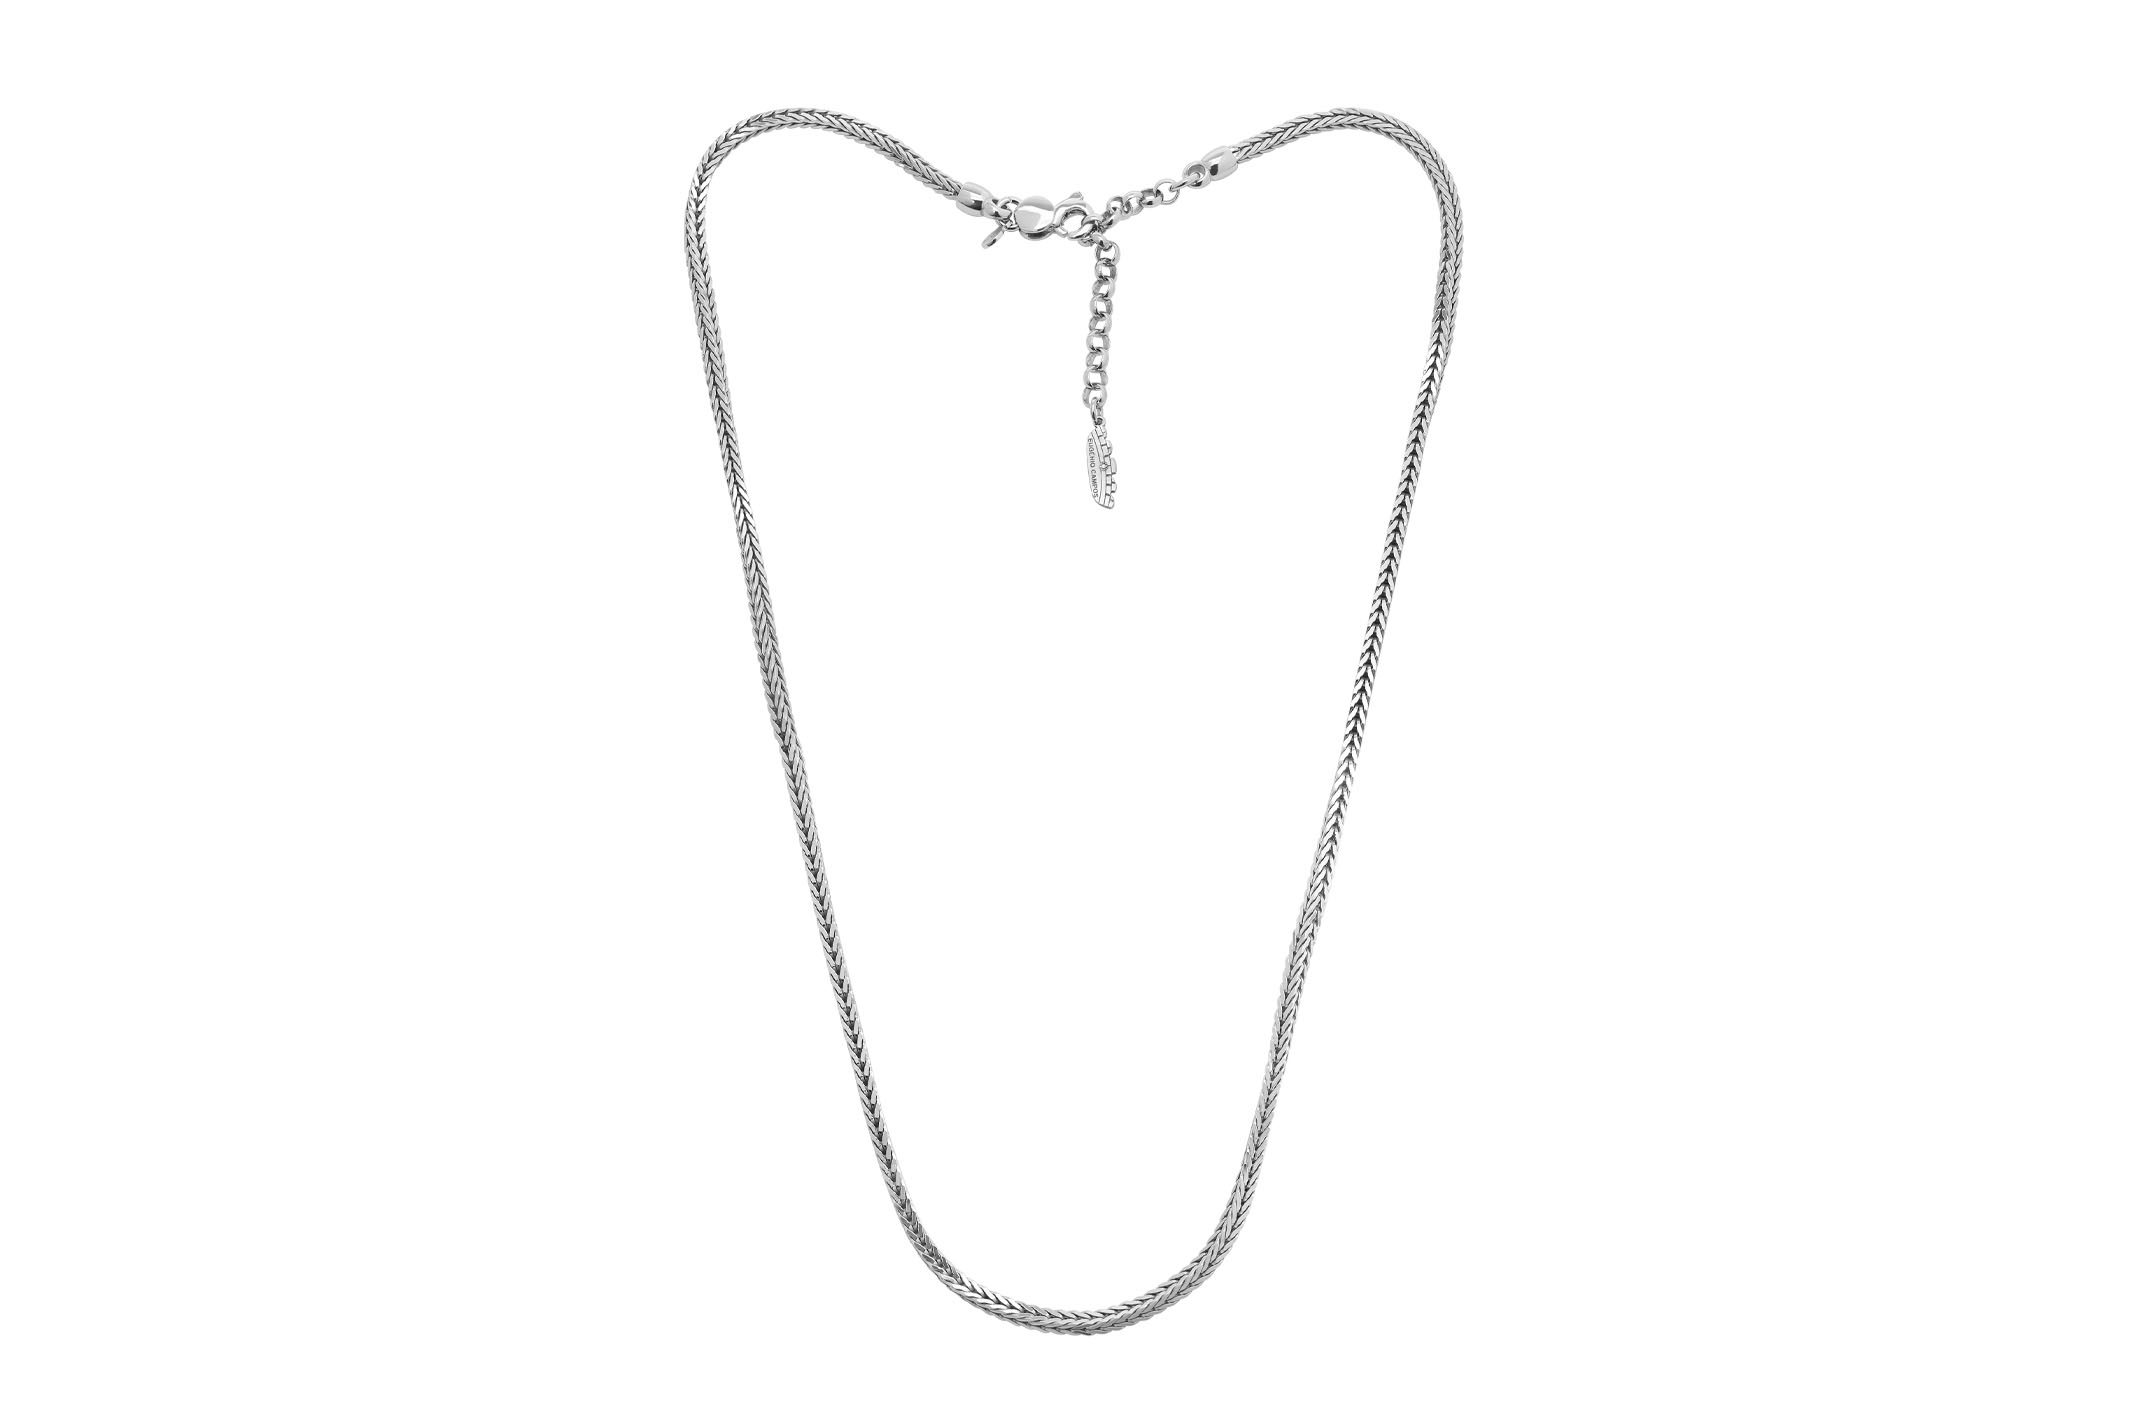 Jewel: necklace;Material: 925 silver;Weight: 19.8 gr;Color: white;Size: 48 cm + 5 cm